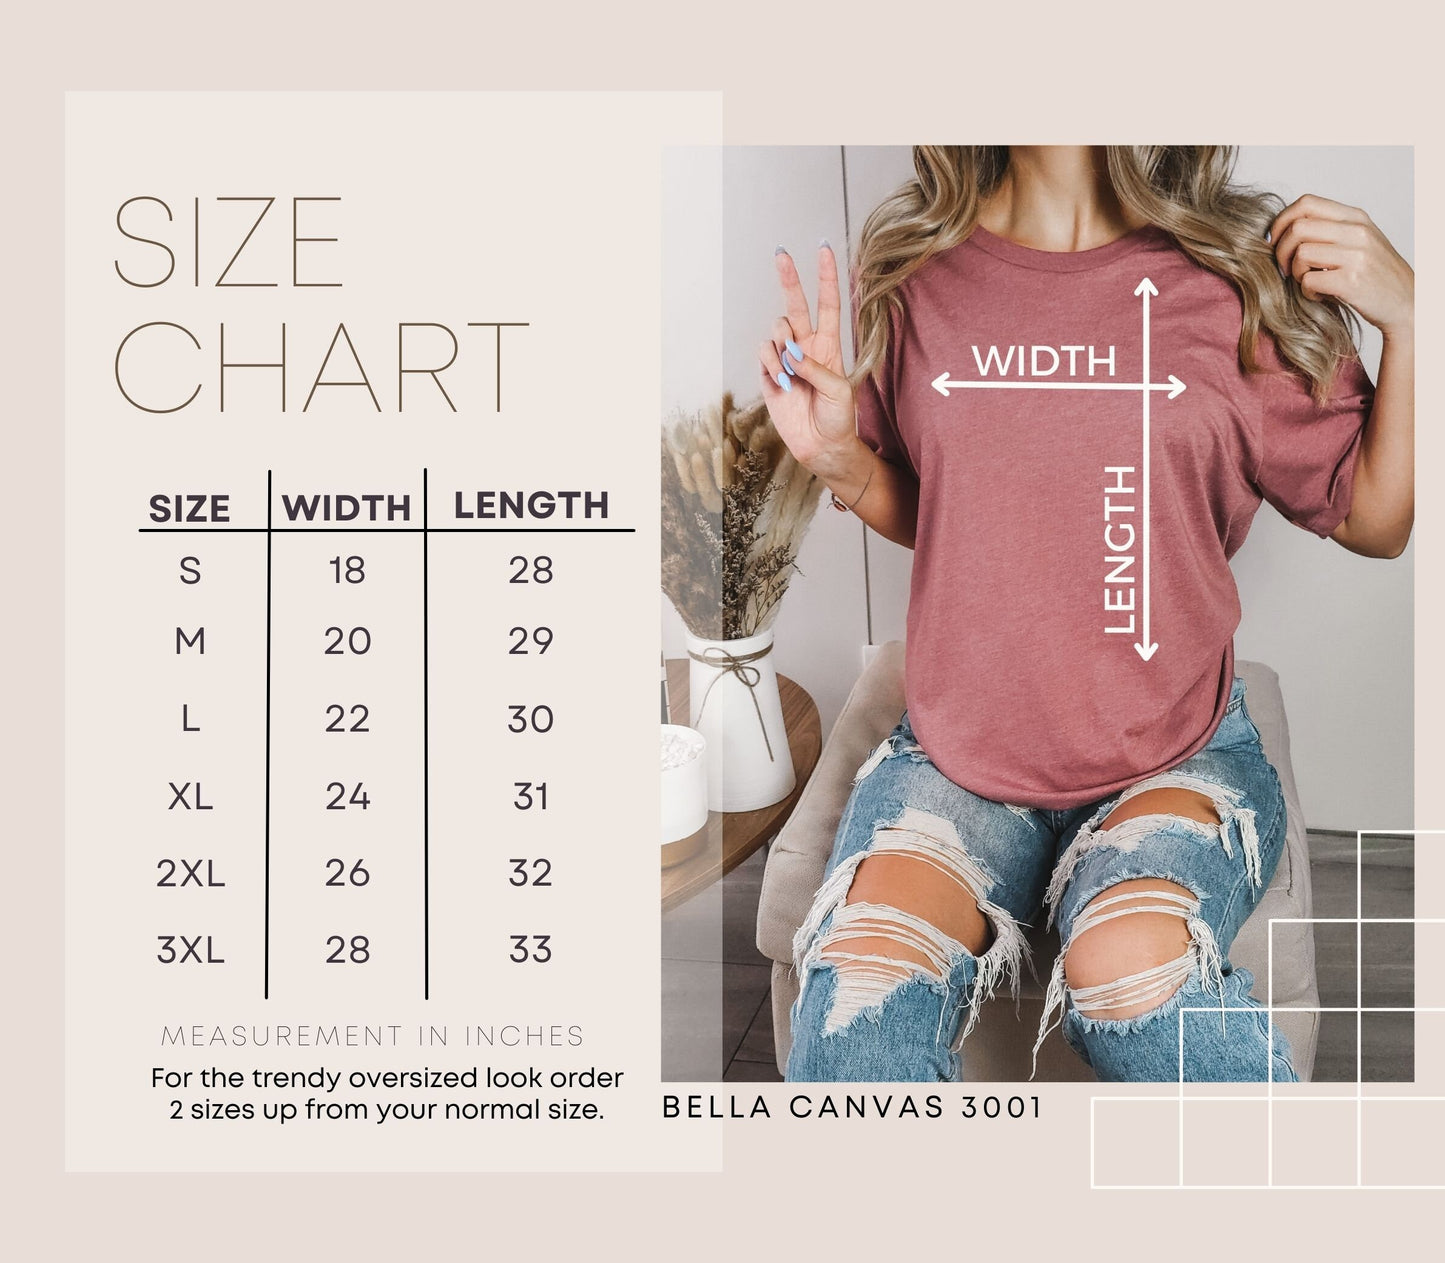 Bella Canvas 3001 Size chart for Scorpion Tees Etsy Shop. Features Size, Width and Length Measurements.  Visit the Scorpion Tees Etsy Store at
www.scorpiontees.etsy.com